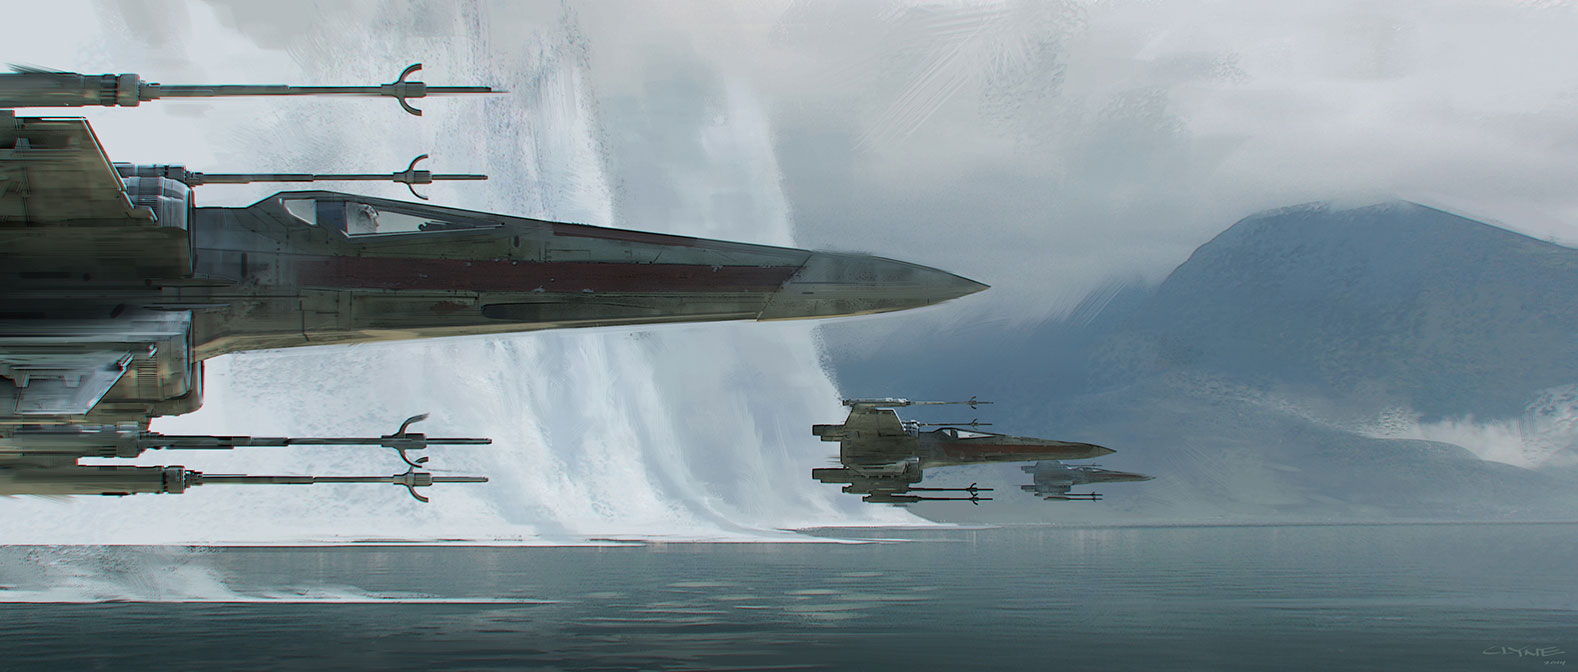 The Force Awakens’ Concept Art Had Some Cool Ideas